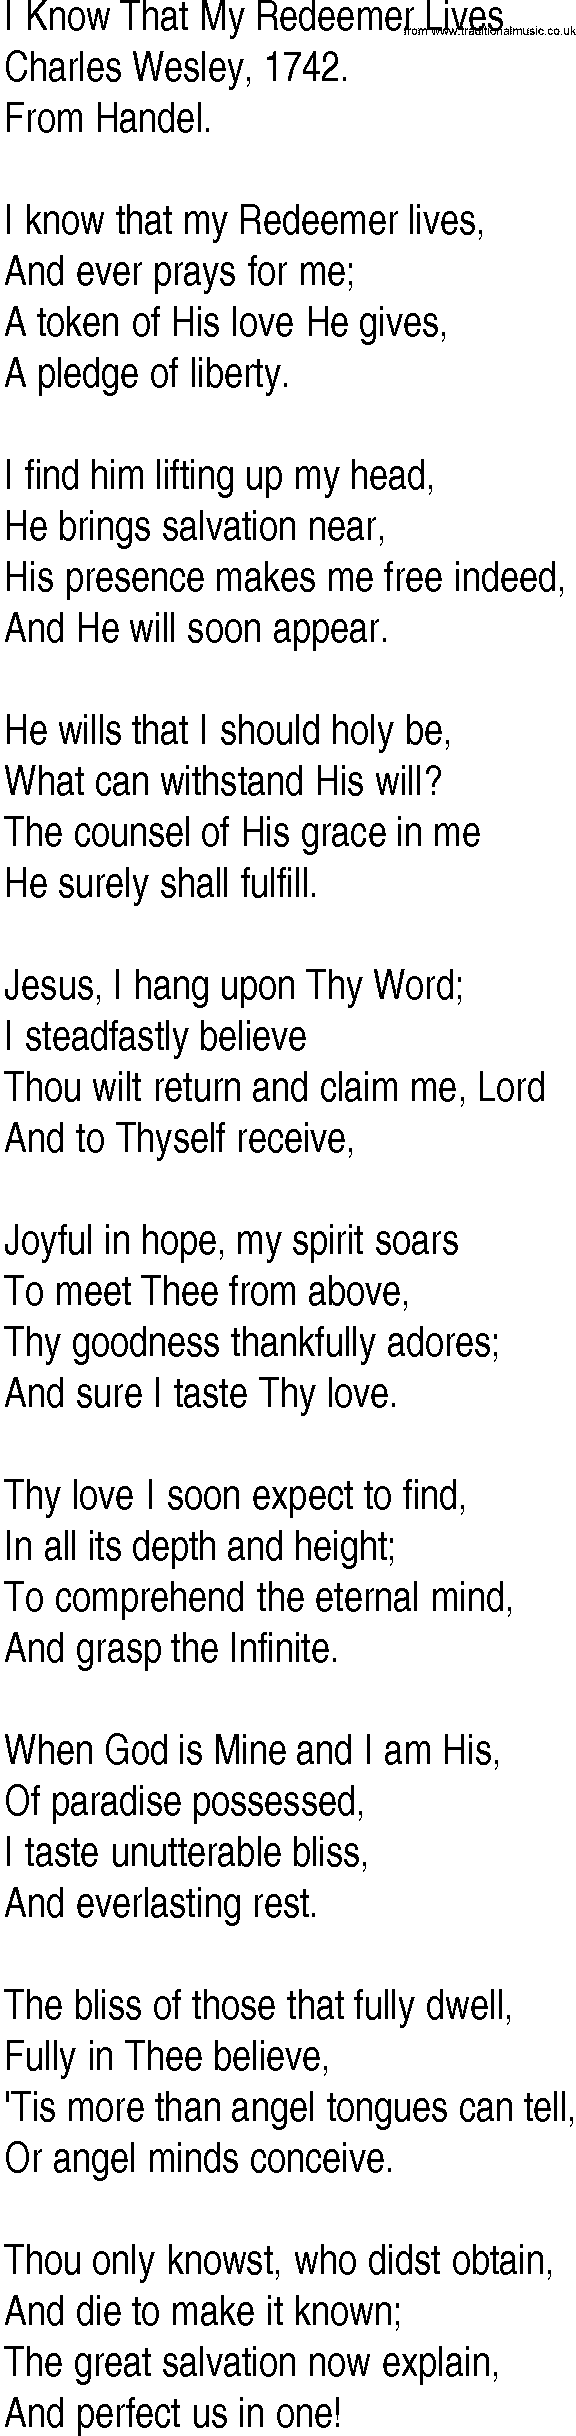 Hymn and Gospel Song: I Know That My Redeemer Lives by Charles Wesley lyrics